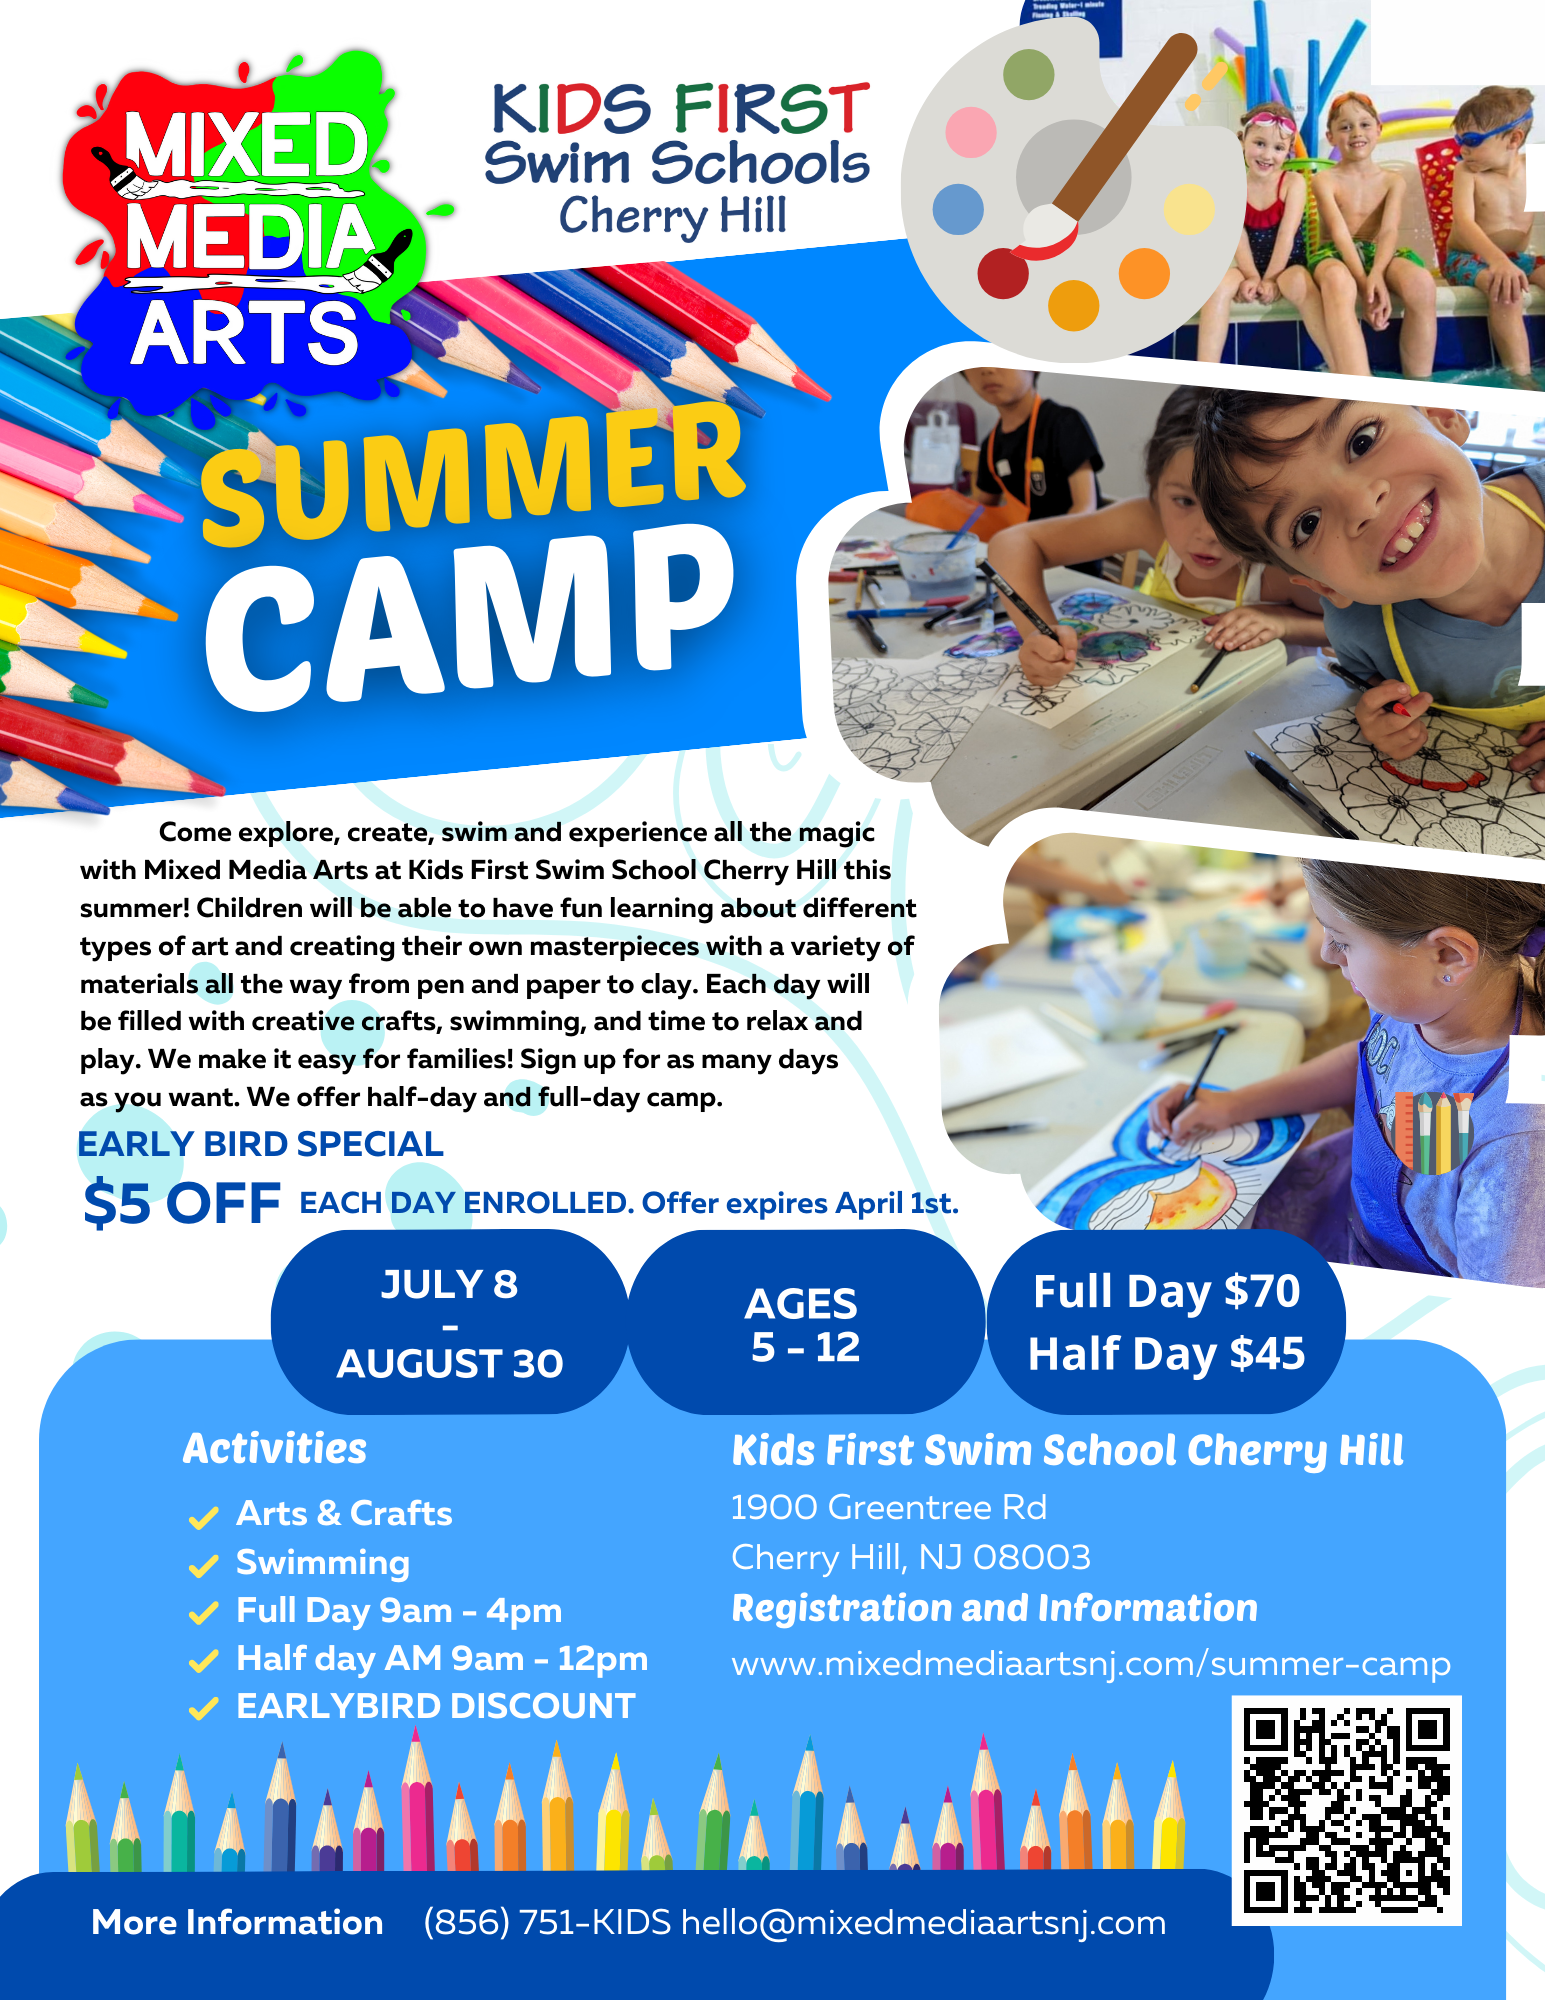 Come explore, create, swim and experience all the magic with Mixed Media Arts at Kids First Swim School Cherry Hill this Summer! Children will be able to have fun learning about different types of art and creating their own masterpieces with a variety of materials all the way from pen and paper to clay. Each day will be filled with creative crafts, swimming, and time to relax and play. We make it easy for families! Sign up for as many days as you want. We offer half-day and full-day experiences. Every day is a great day to come create and play!